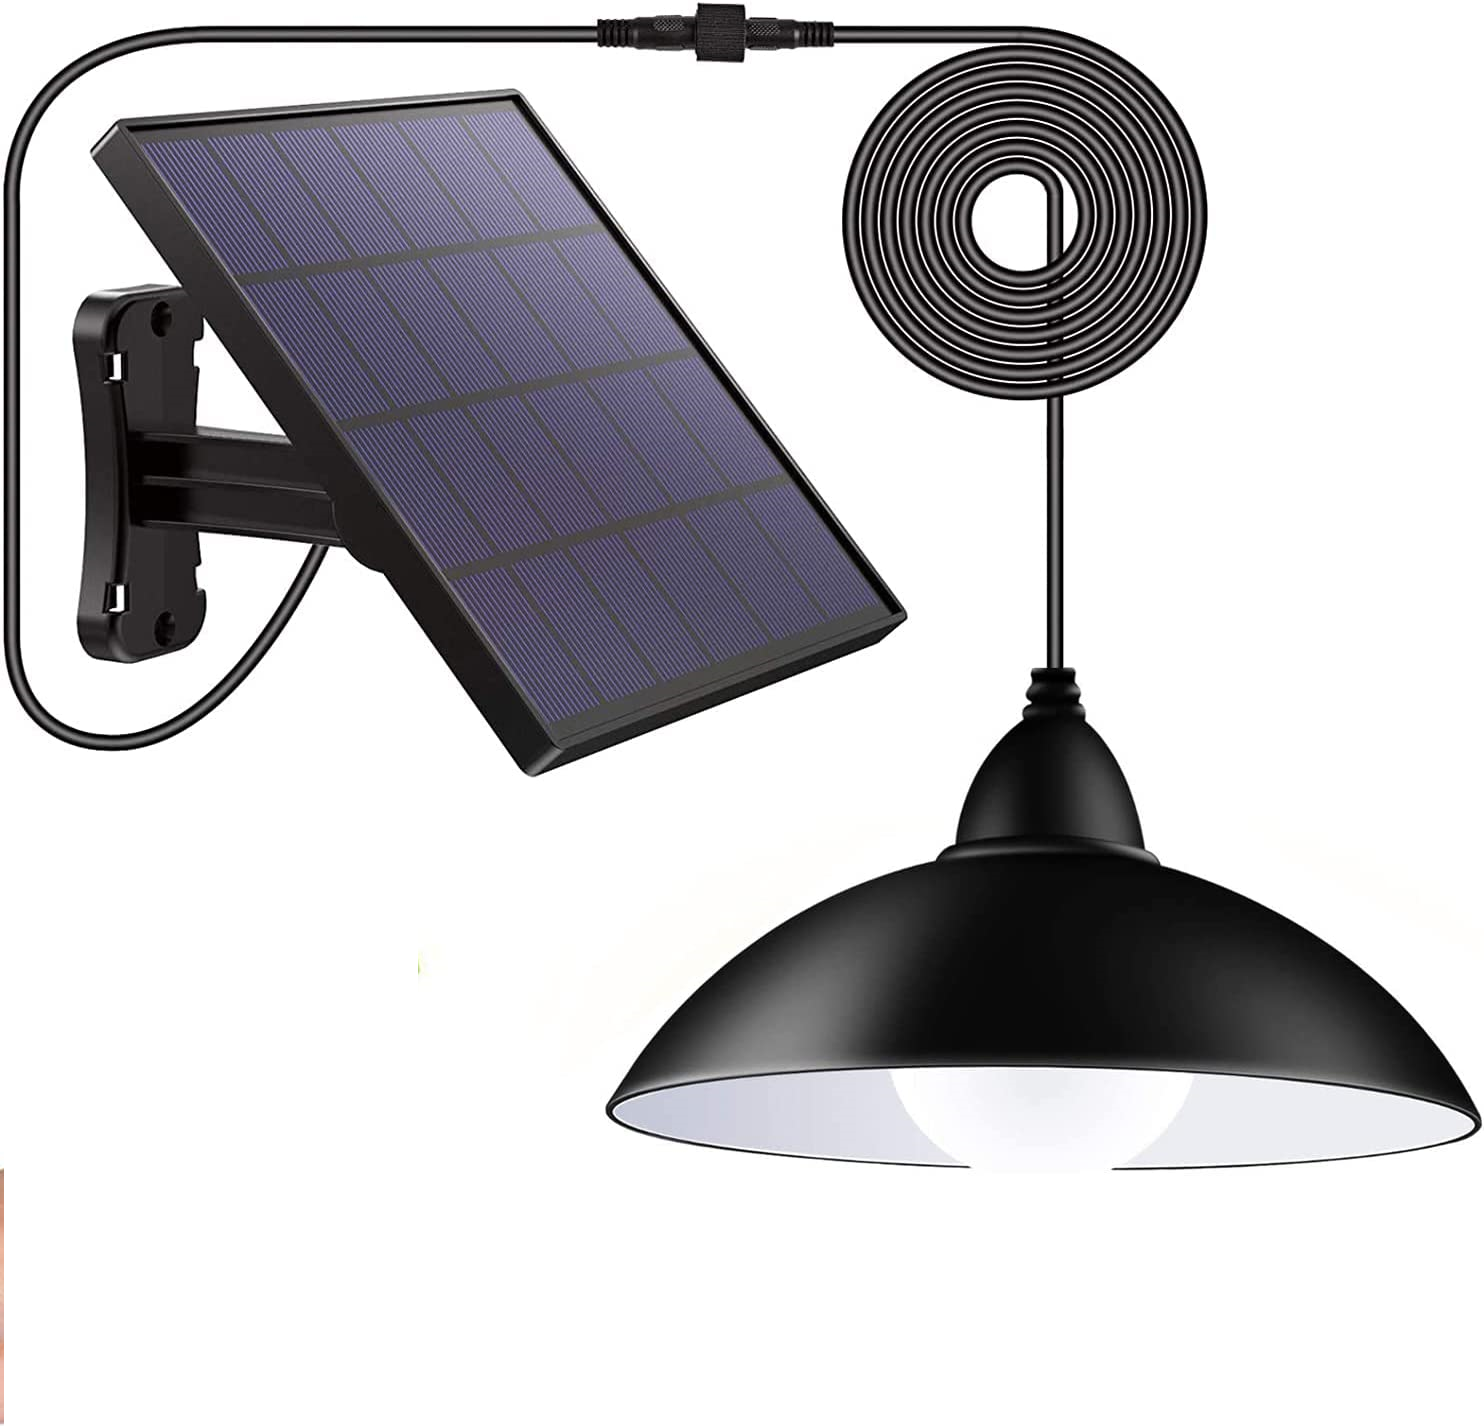 Solar Powered Hanging Pendant Lamp with Remote Control Outdoor Shed Lights – Cool White